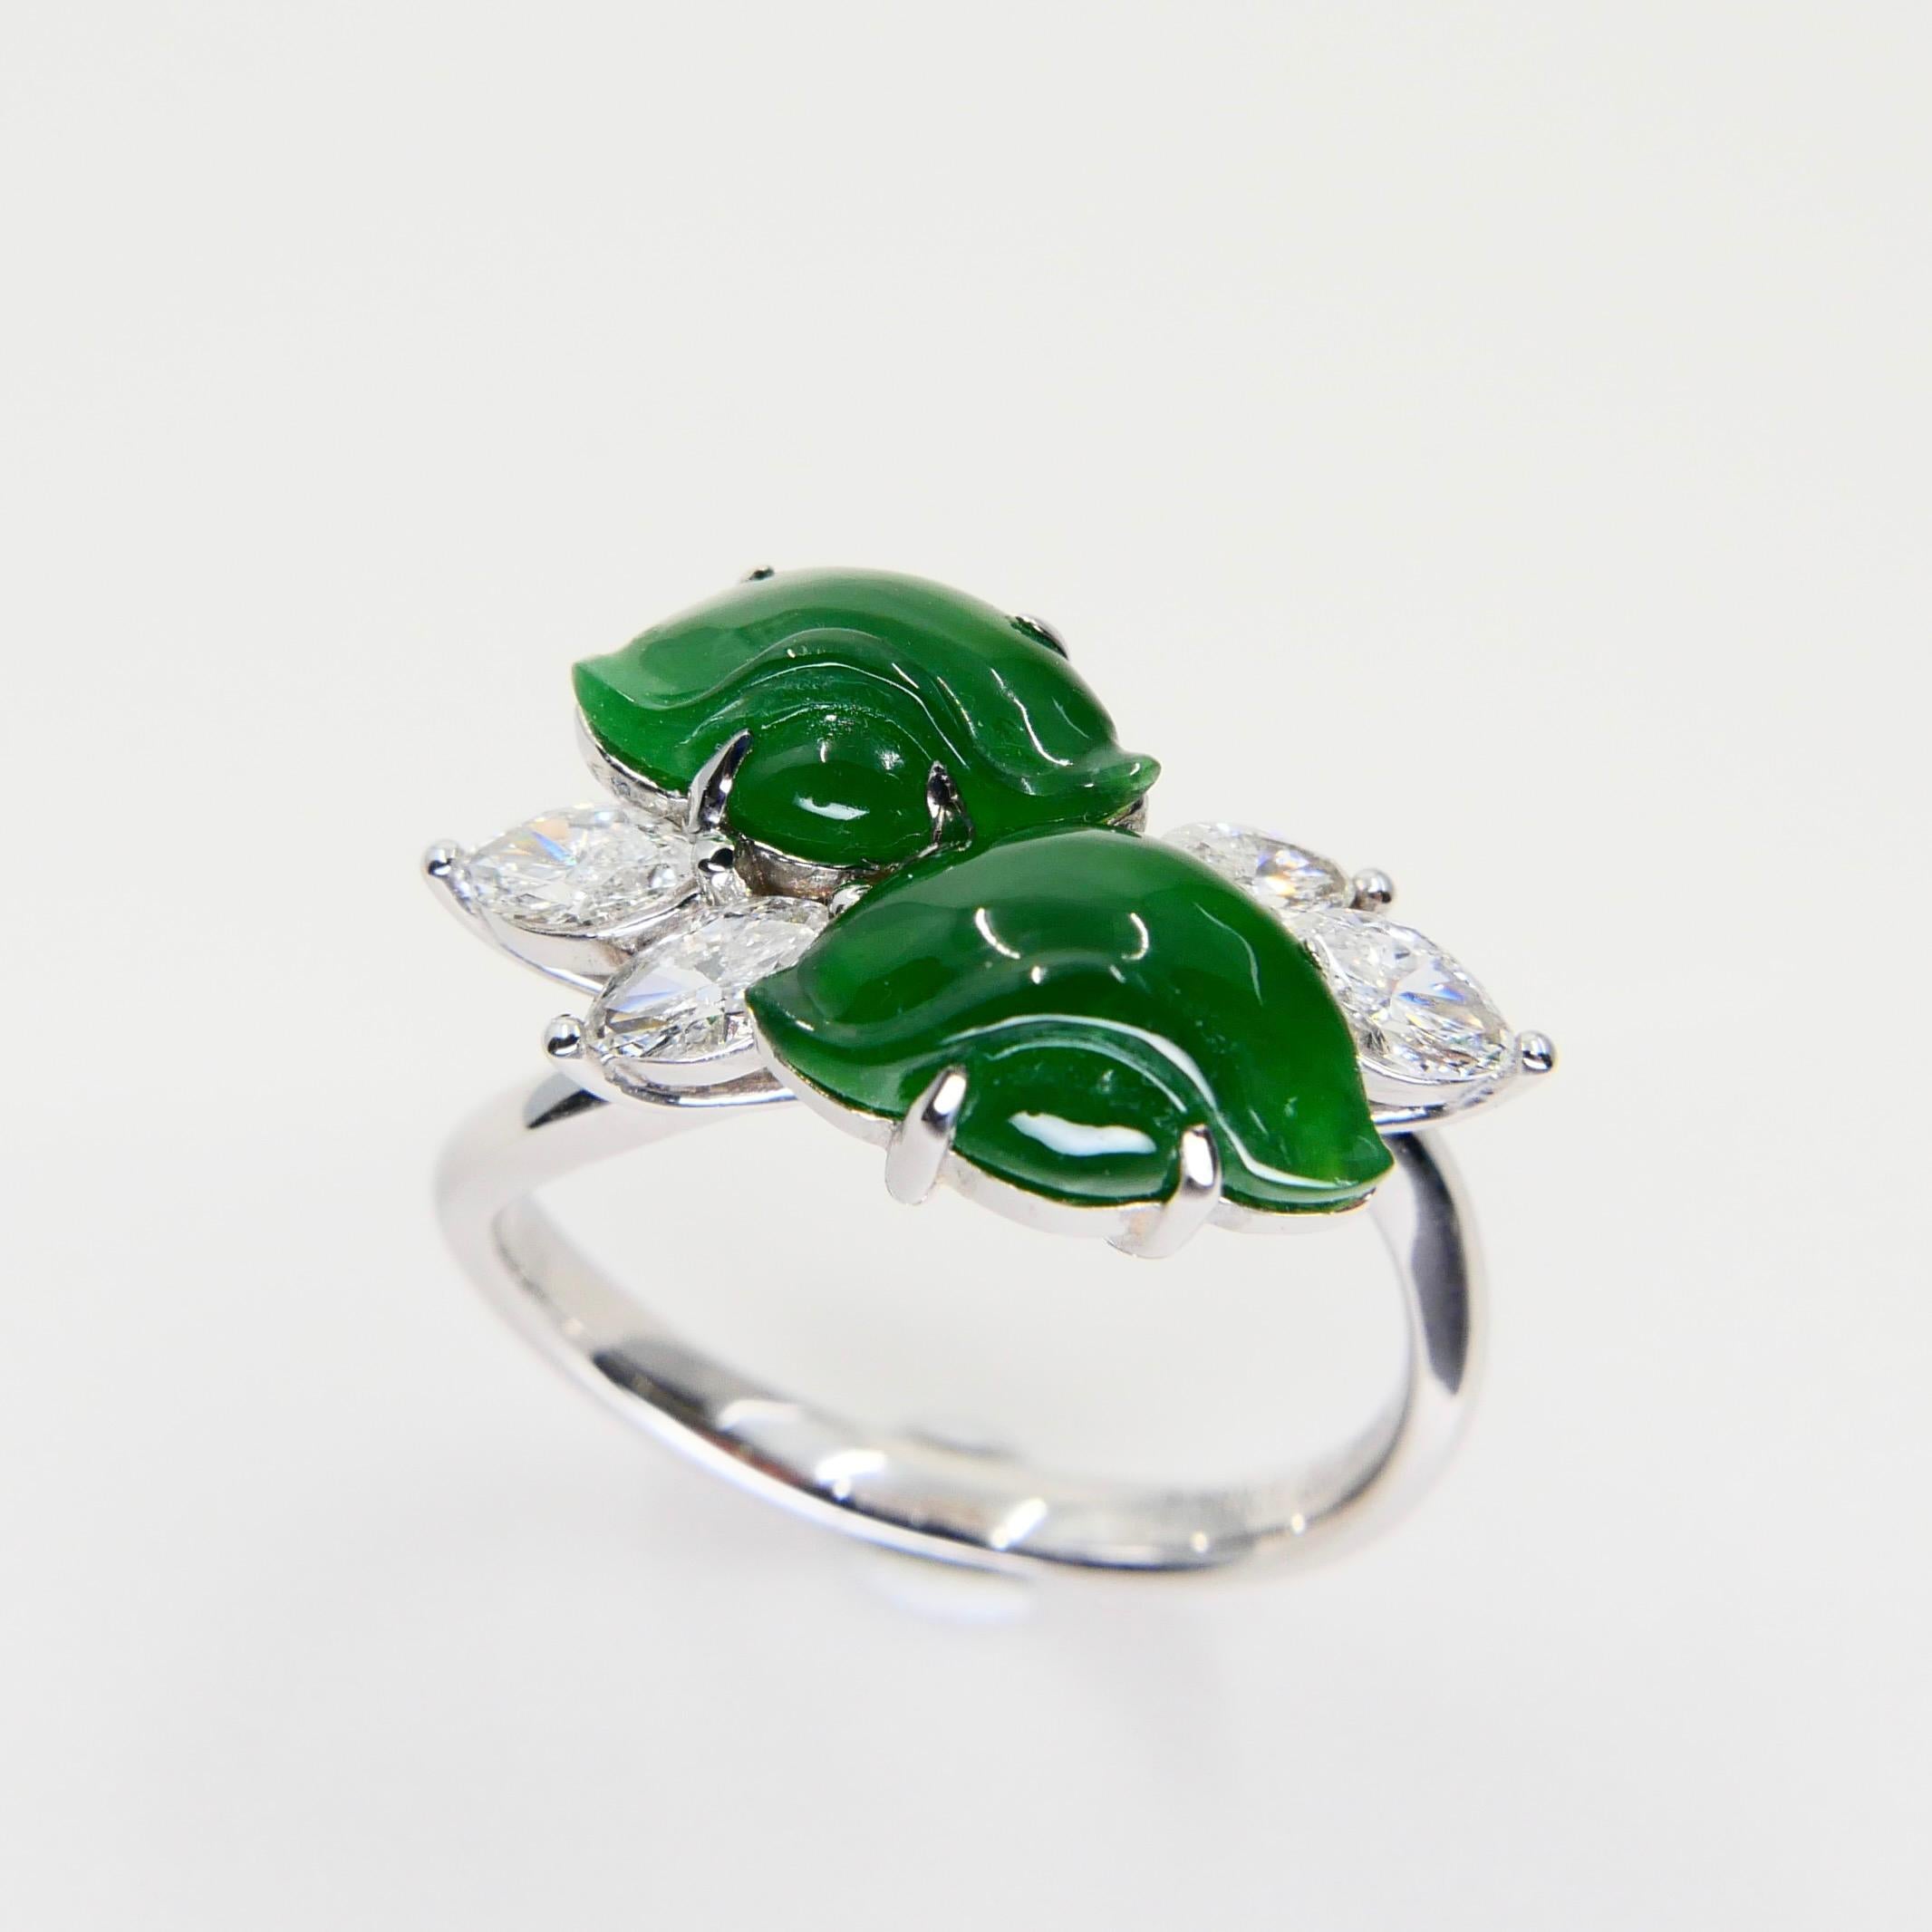 Rough Cut Certified Type A Jadeite Jade Ingot & Diamond Cocktail Ring, Imperial Green For Sale